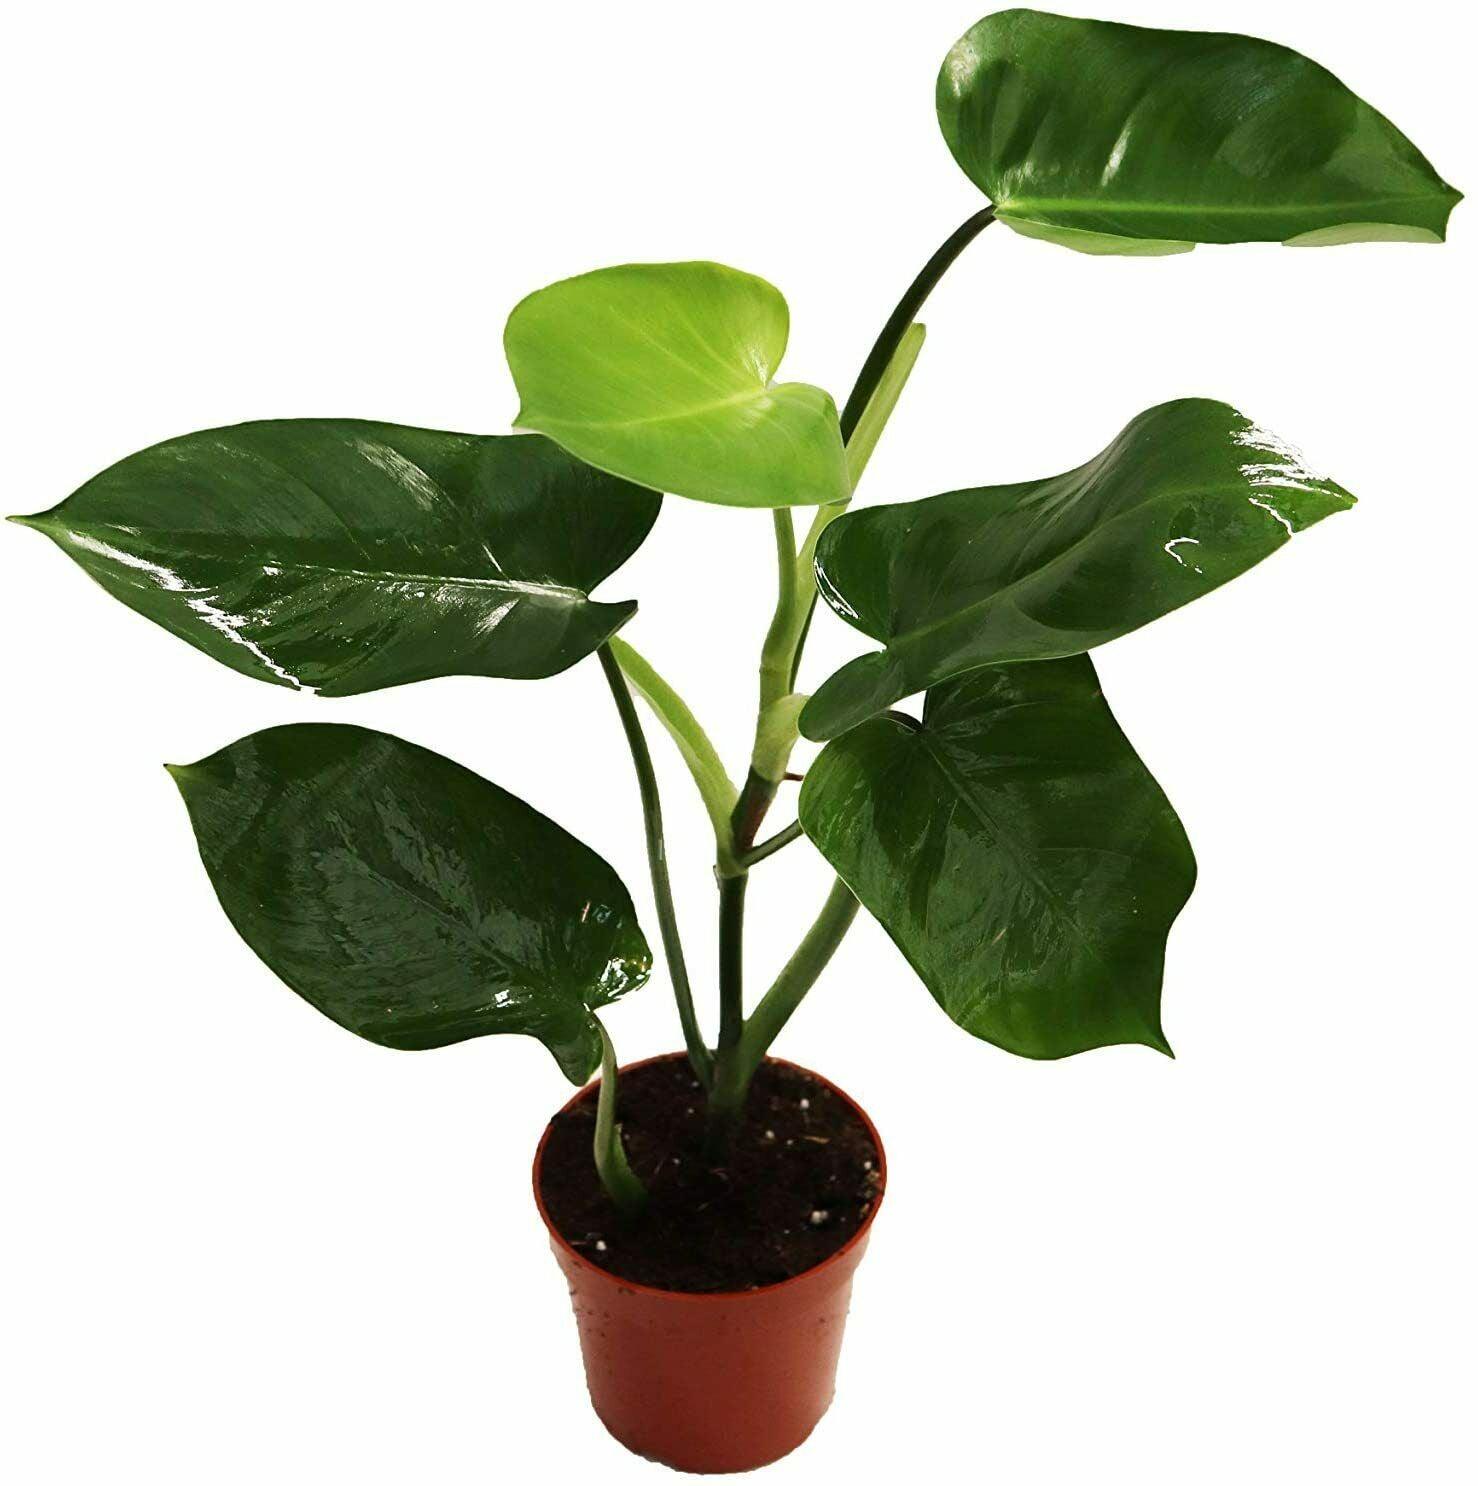 Philodendron 'Green Emerald' - Live Potted Plant, 4'' Pot - Tropical House Plant - The Nursery Center